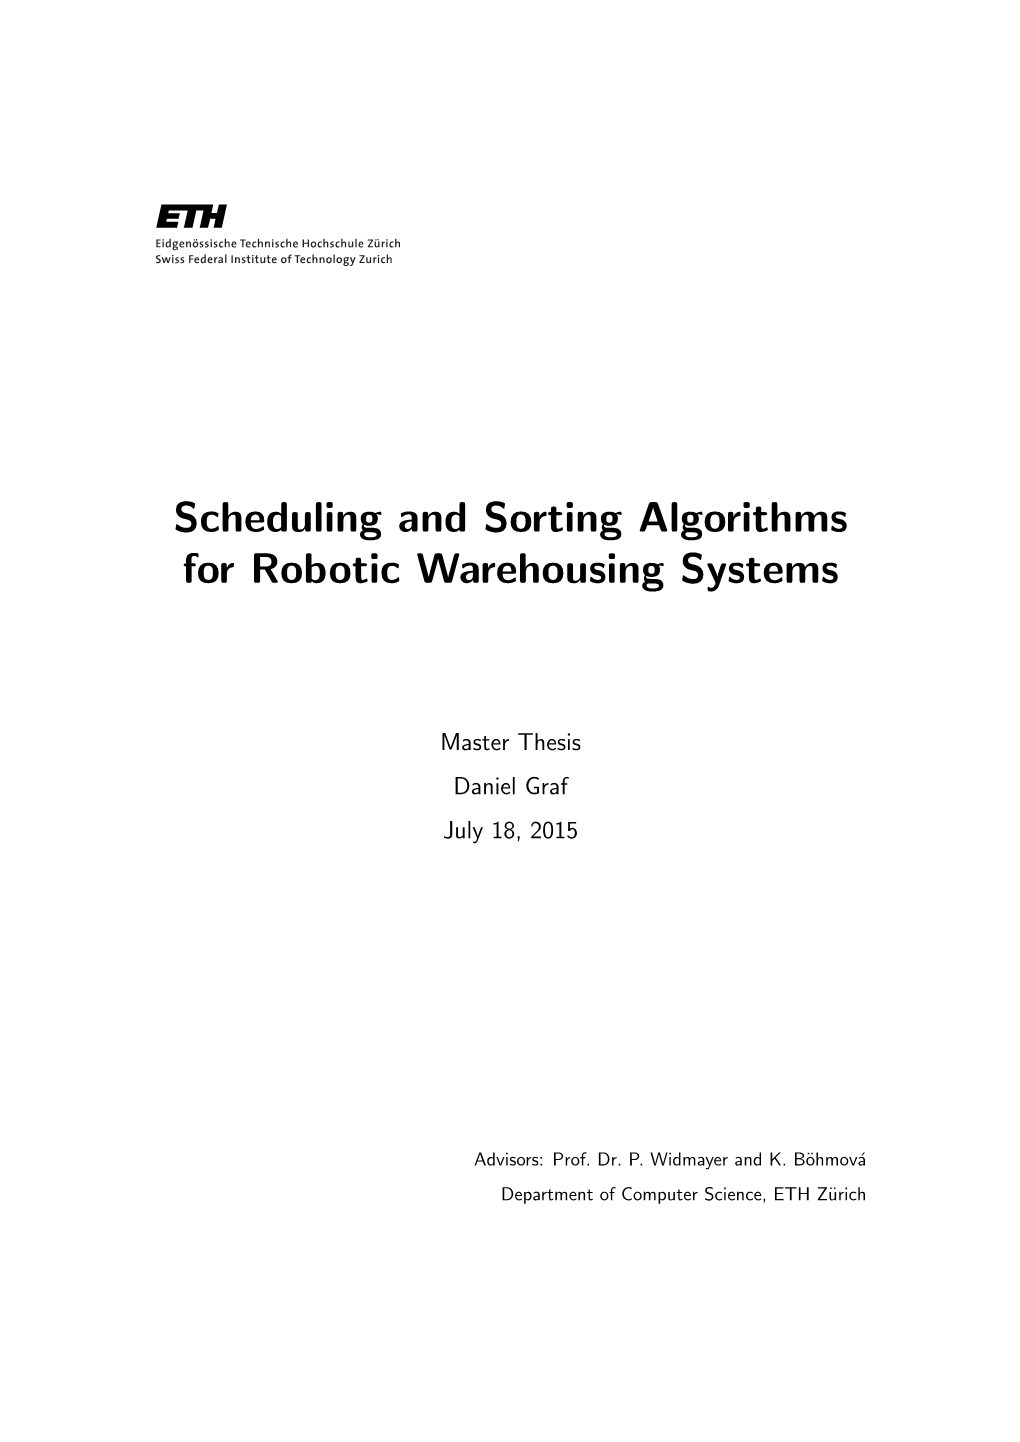 Scheduling and Sorting Algorithms for Robotic Warehousing Systems